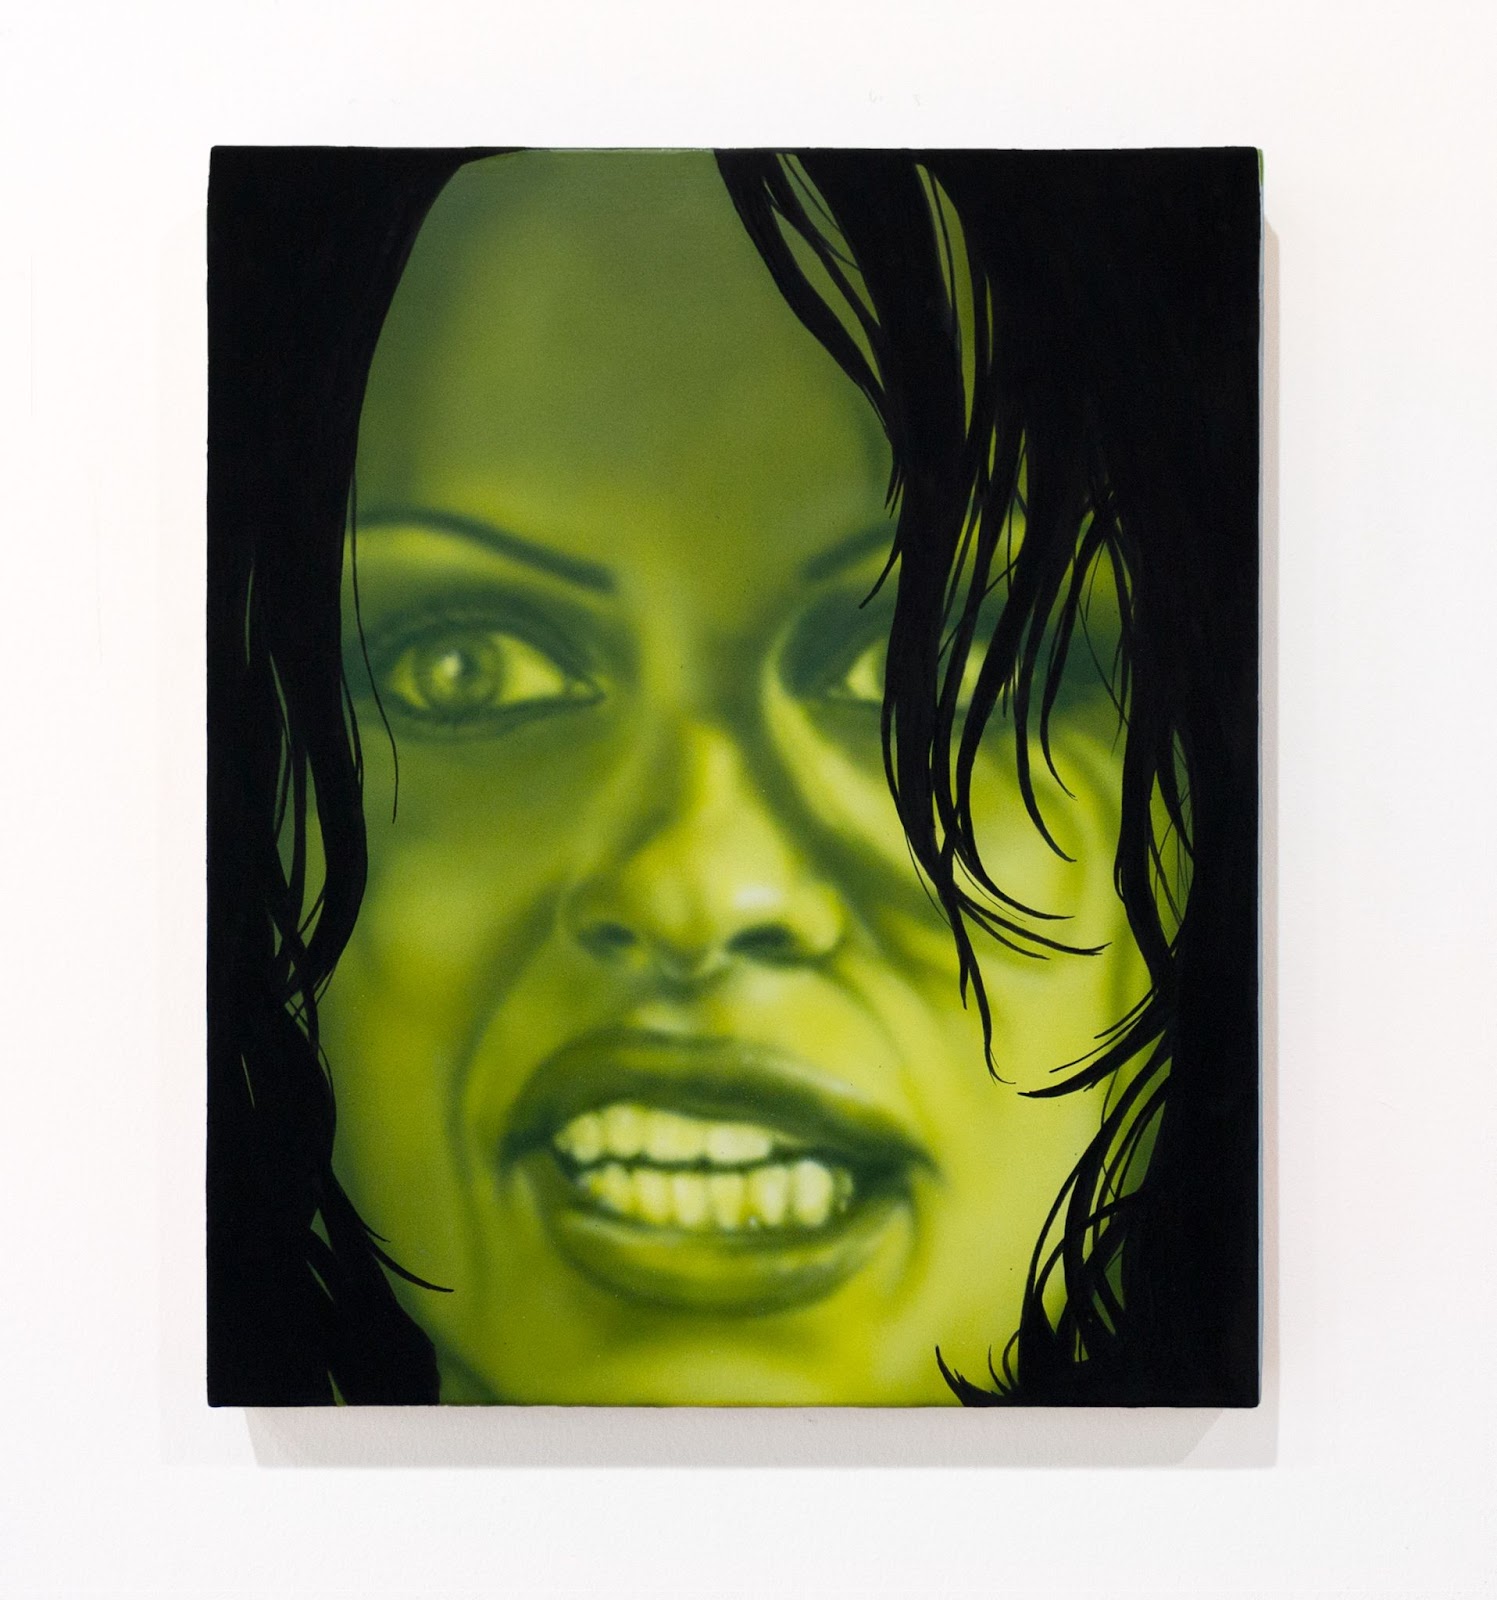 Image: Liza Jo Eilers, I’d Beg to Disagree but Begging Disagrees with Me, 2022. Acrylic and gouache on canvas, 15 x 18 in.  Pamela Anderson’s face dominates the picture plane and is framed by painterly tendrils of jet black hair. Anderson’s expression is a grimace, suspended in shades of green. Courtesy of artist.